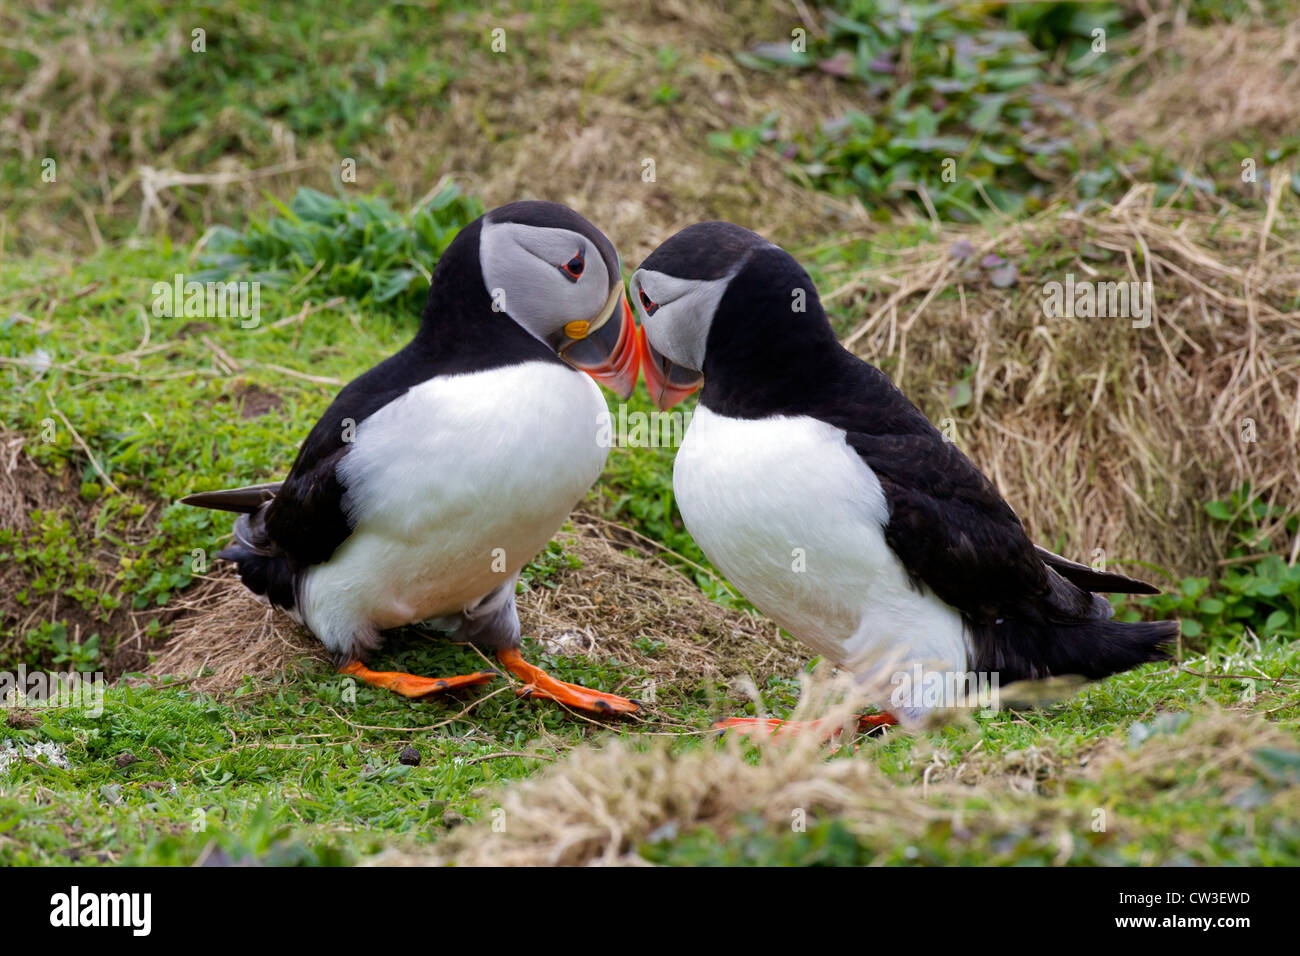 Courtship ritual of mating puffins on Skomer Island, Pembrokeshire National Park, Wales, United Kingdom, UK, Stock Photo